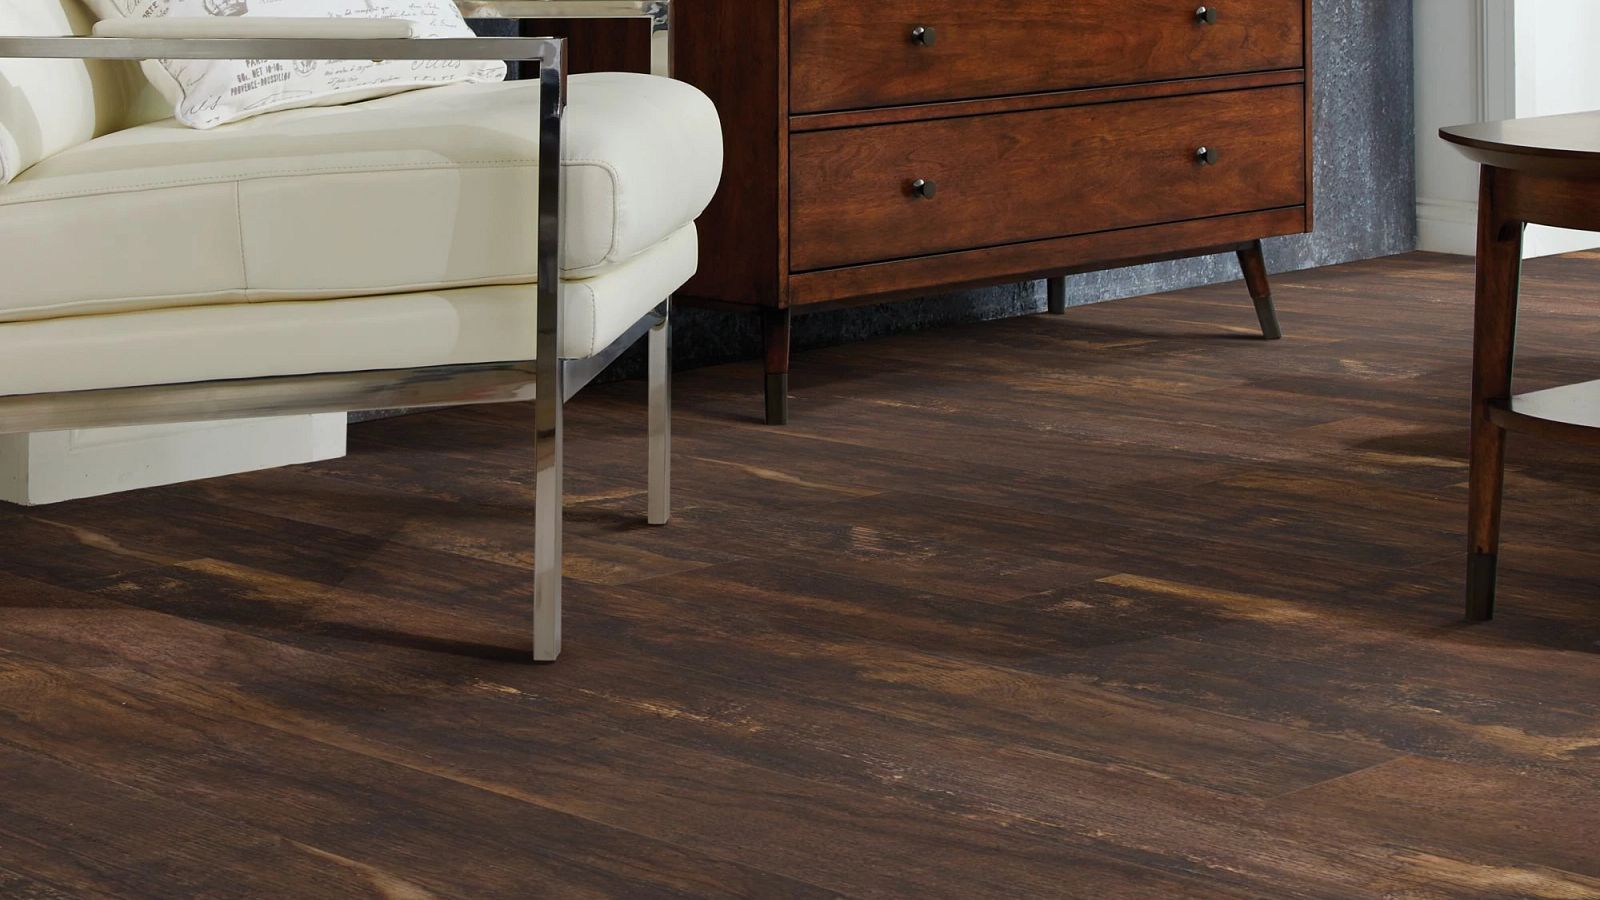 Why Shaw Flooring with Exceptional Quality Shaw Floors